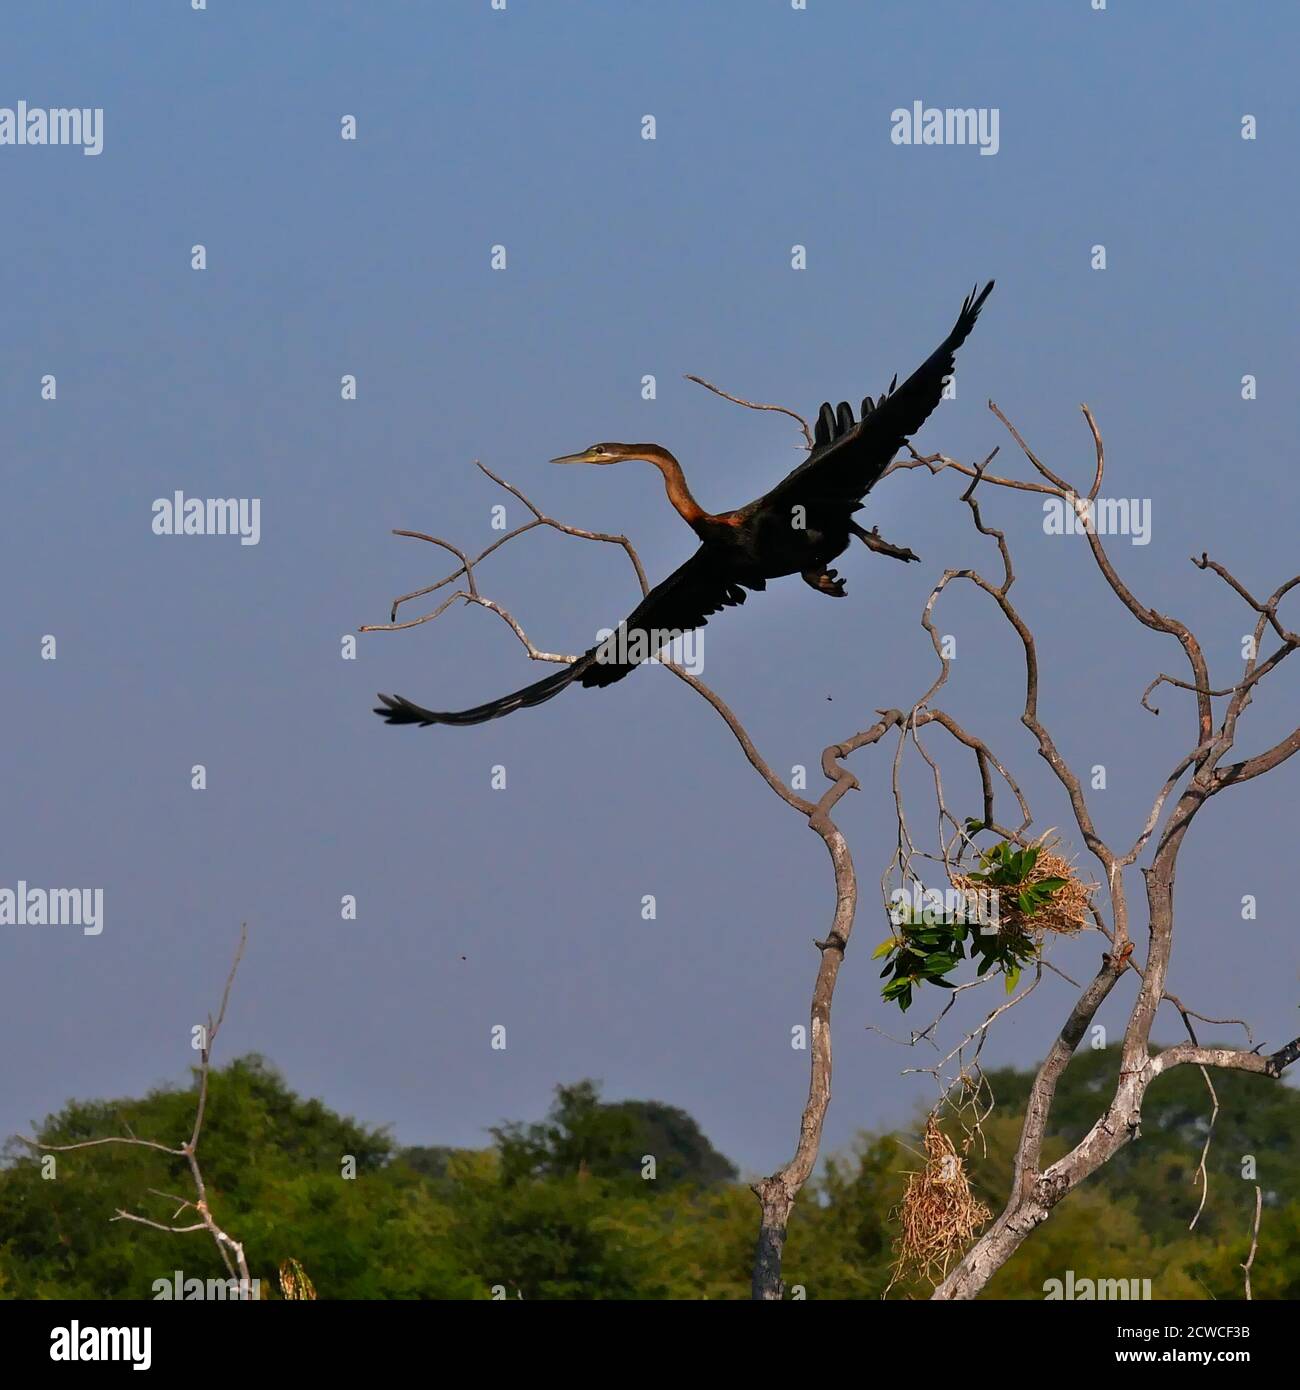 African darter (anhinga rufa, snakebird) with black plumage lifting off a dead tree with nests hanging on it at the bank of Okavango river, Namibia. Stock Photo